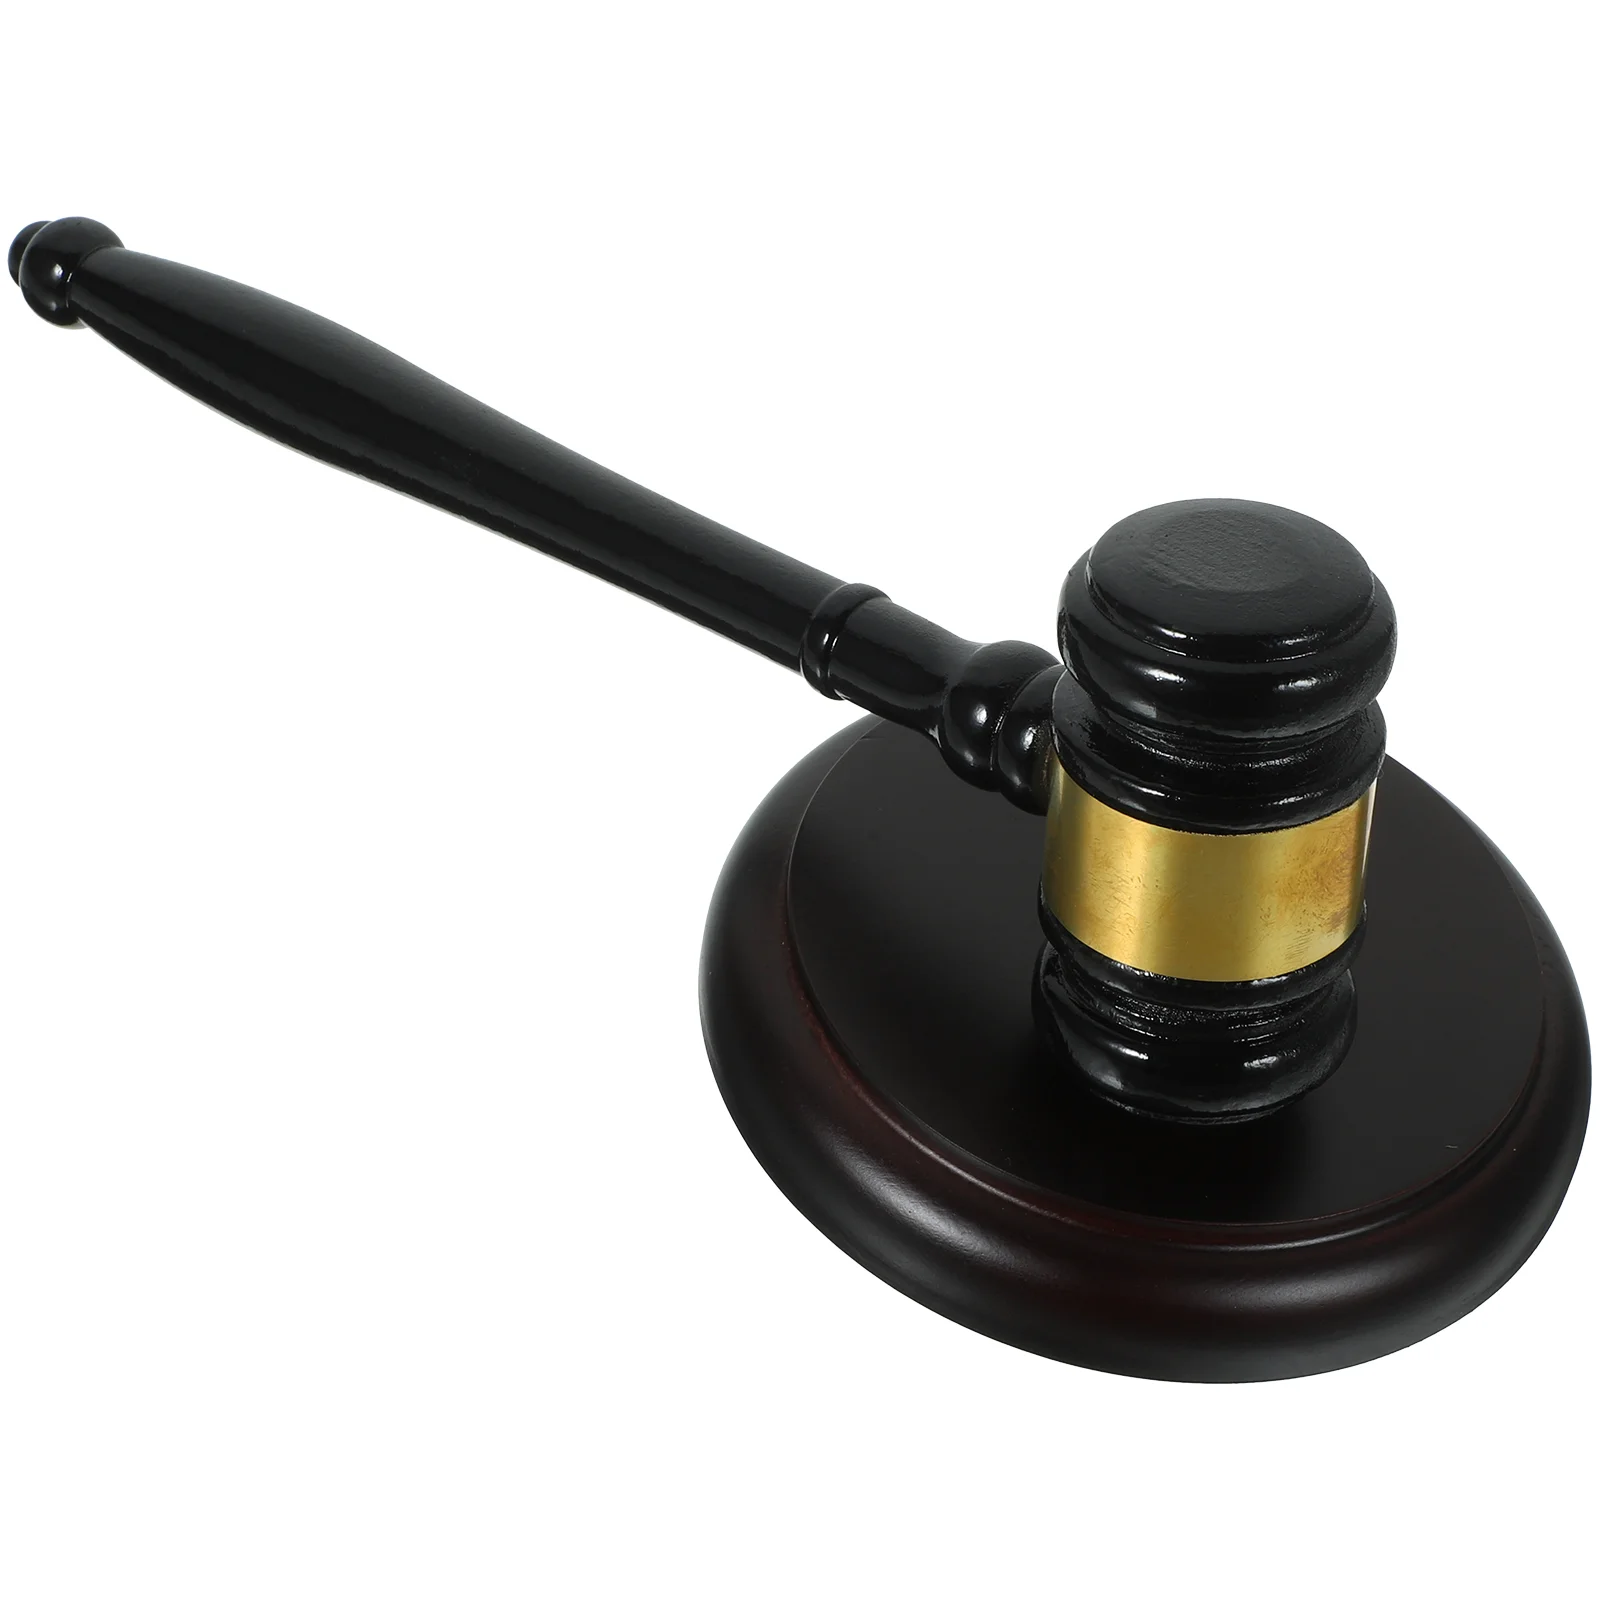 

Auction Gavel Prop Special Hammer Gavels Wooden Solid Judge Child Court Hammers